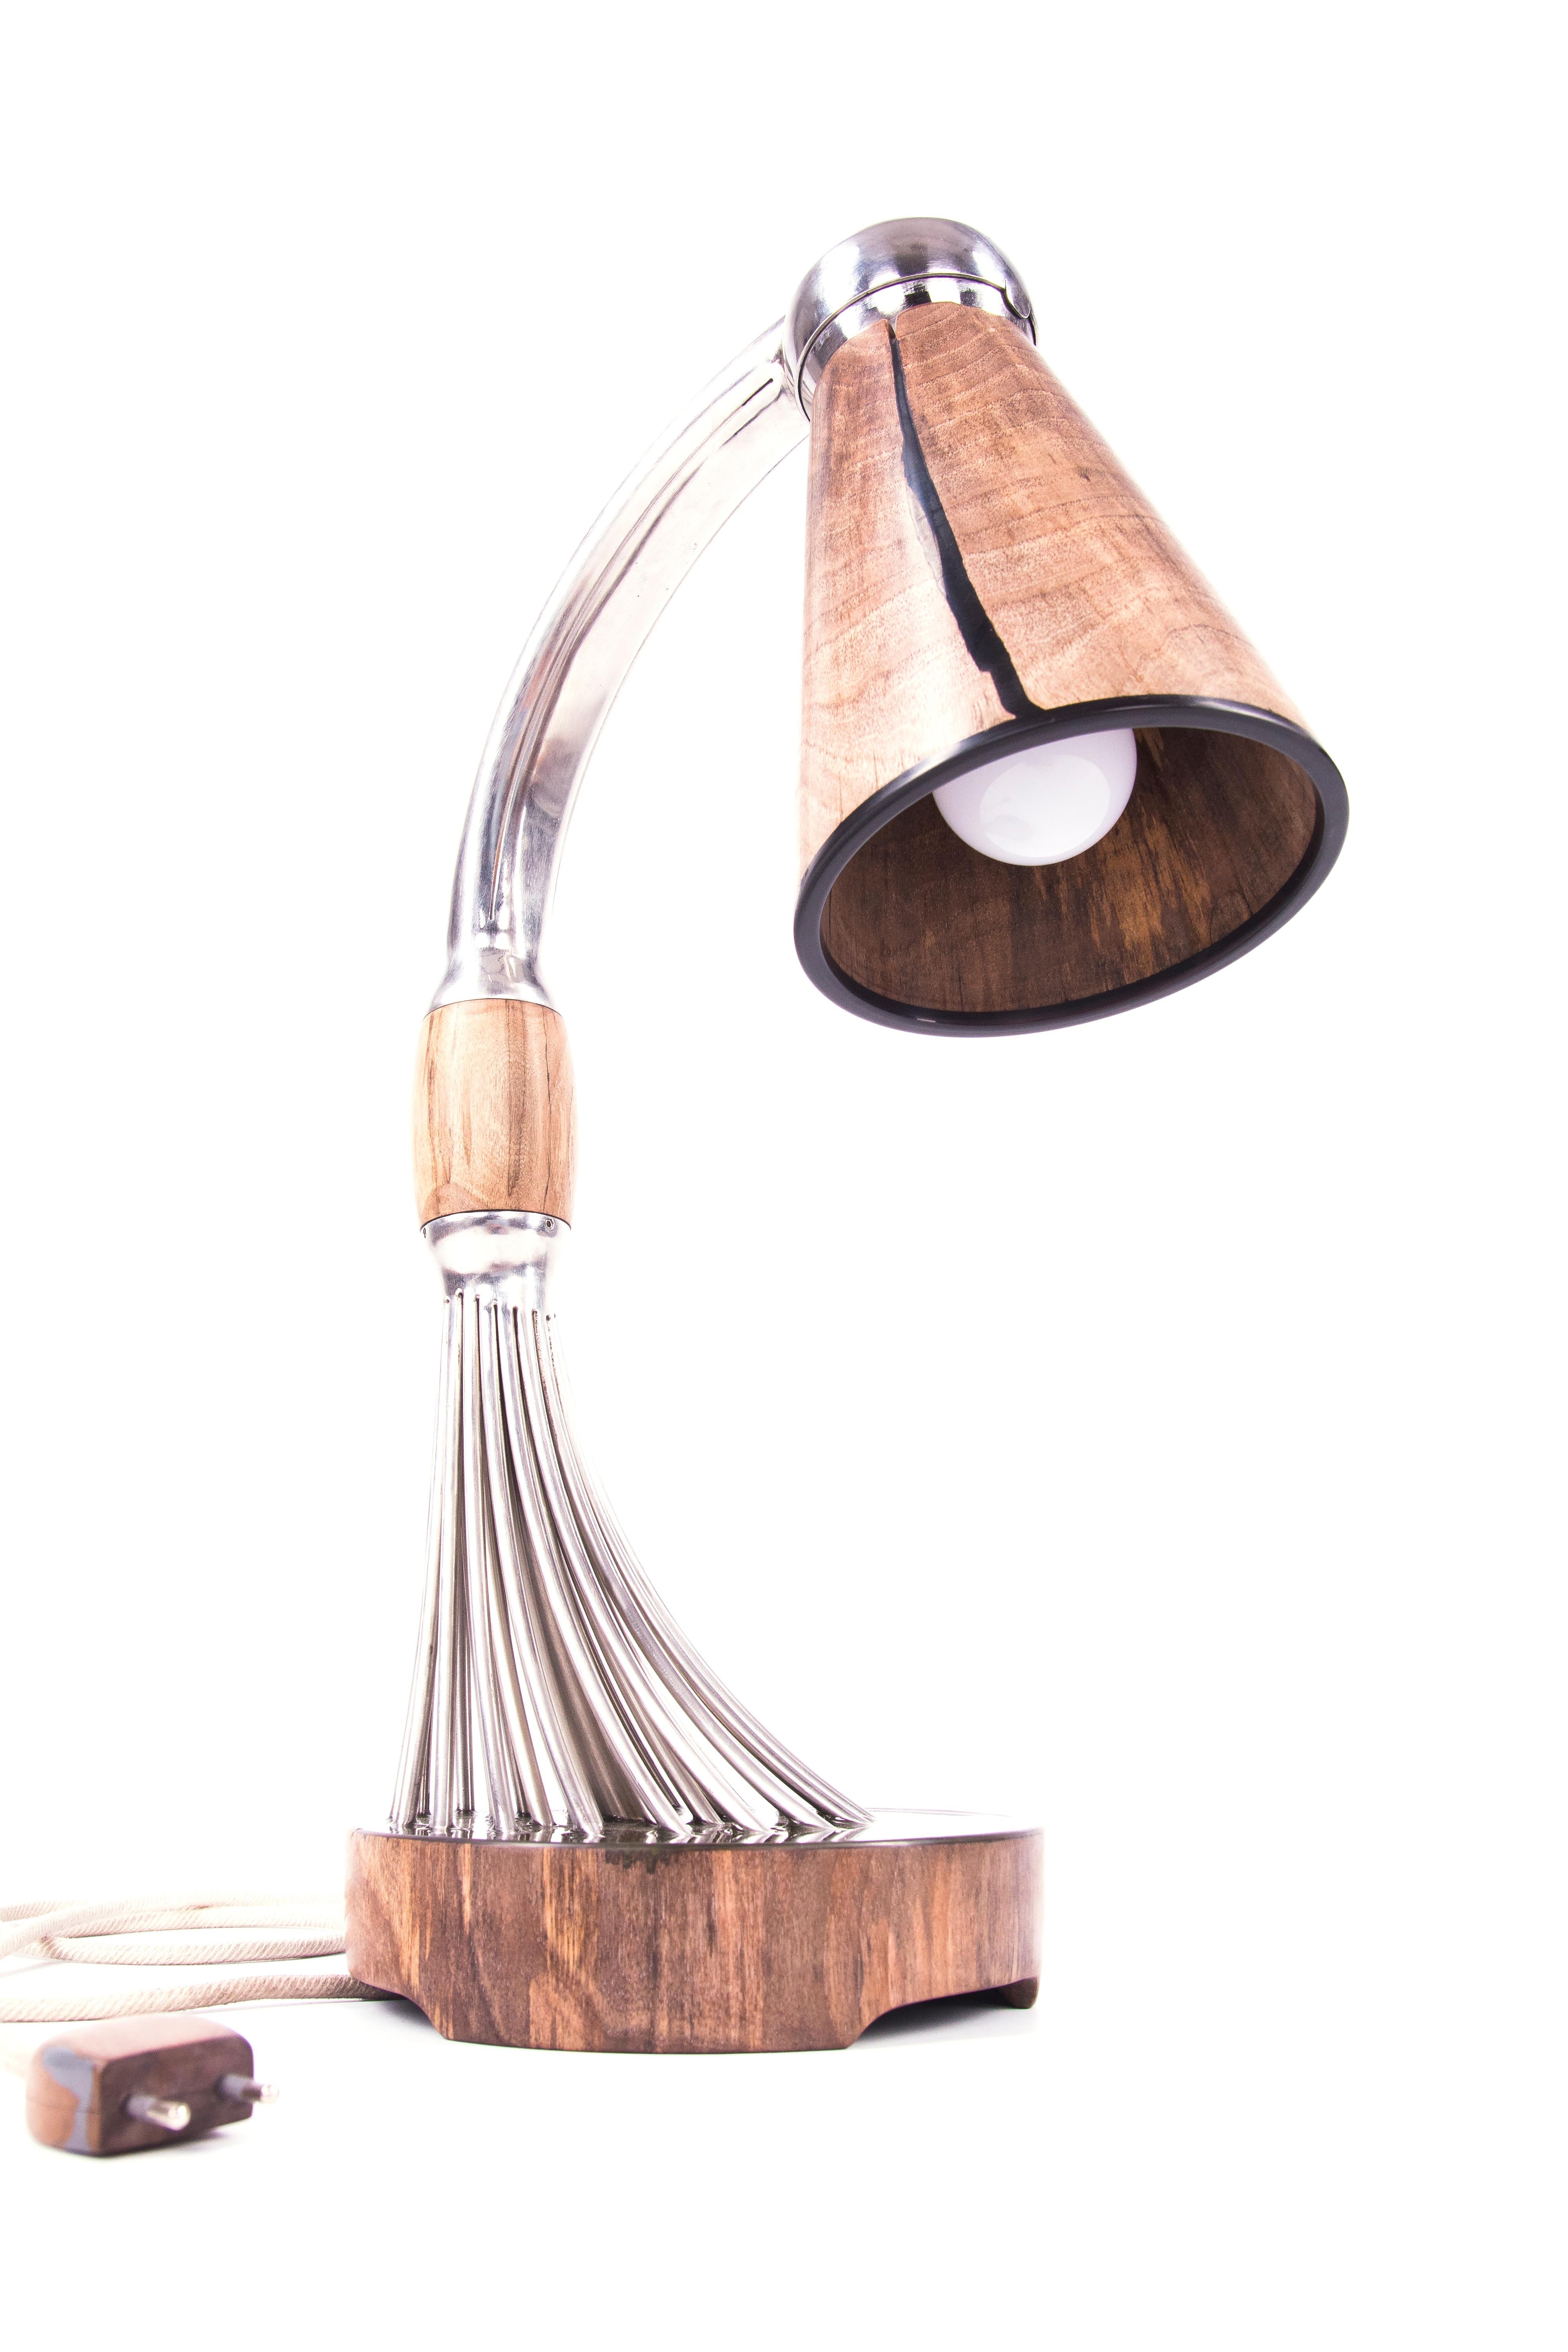 The lamp itself is based on the idea of ??creating an unconventional switching mechanism and joining two different materials - wood and stainless steel.
A simple switch is a practical companion, but I always missed a certain amount of interest and